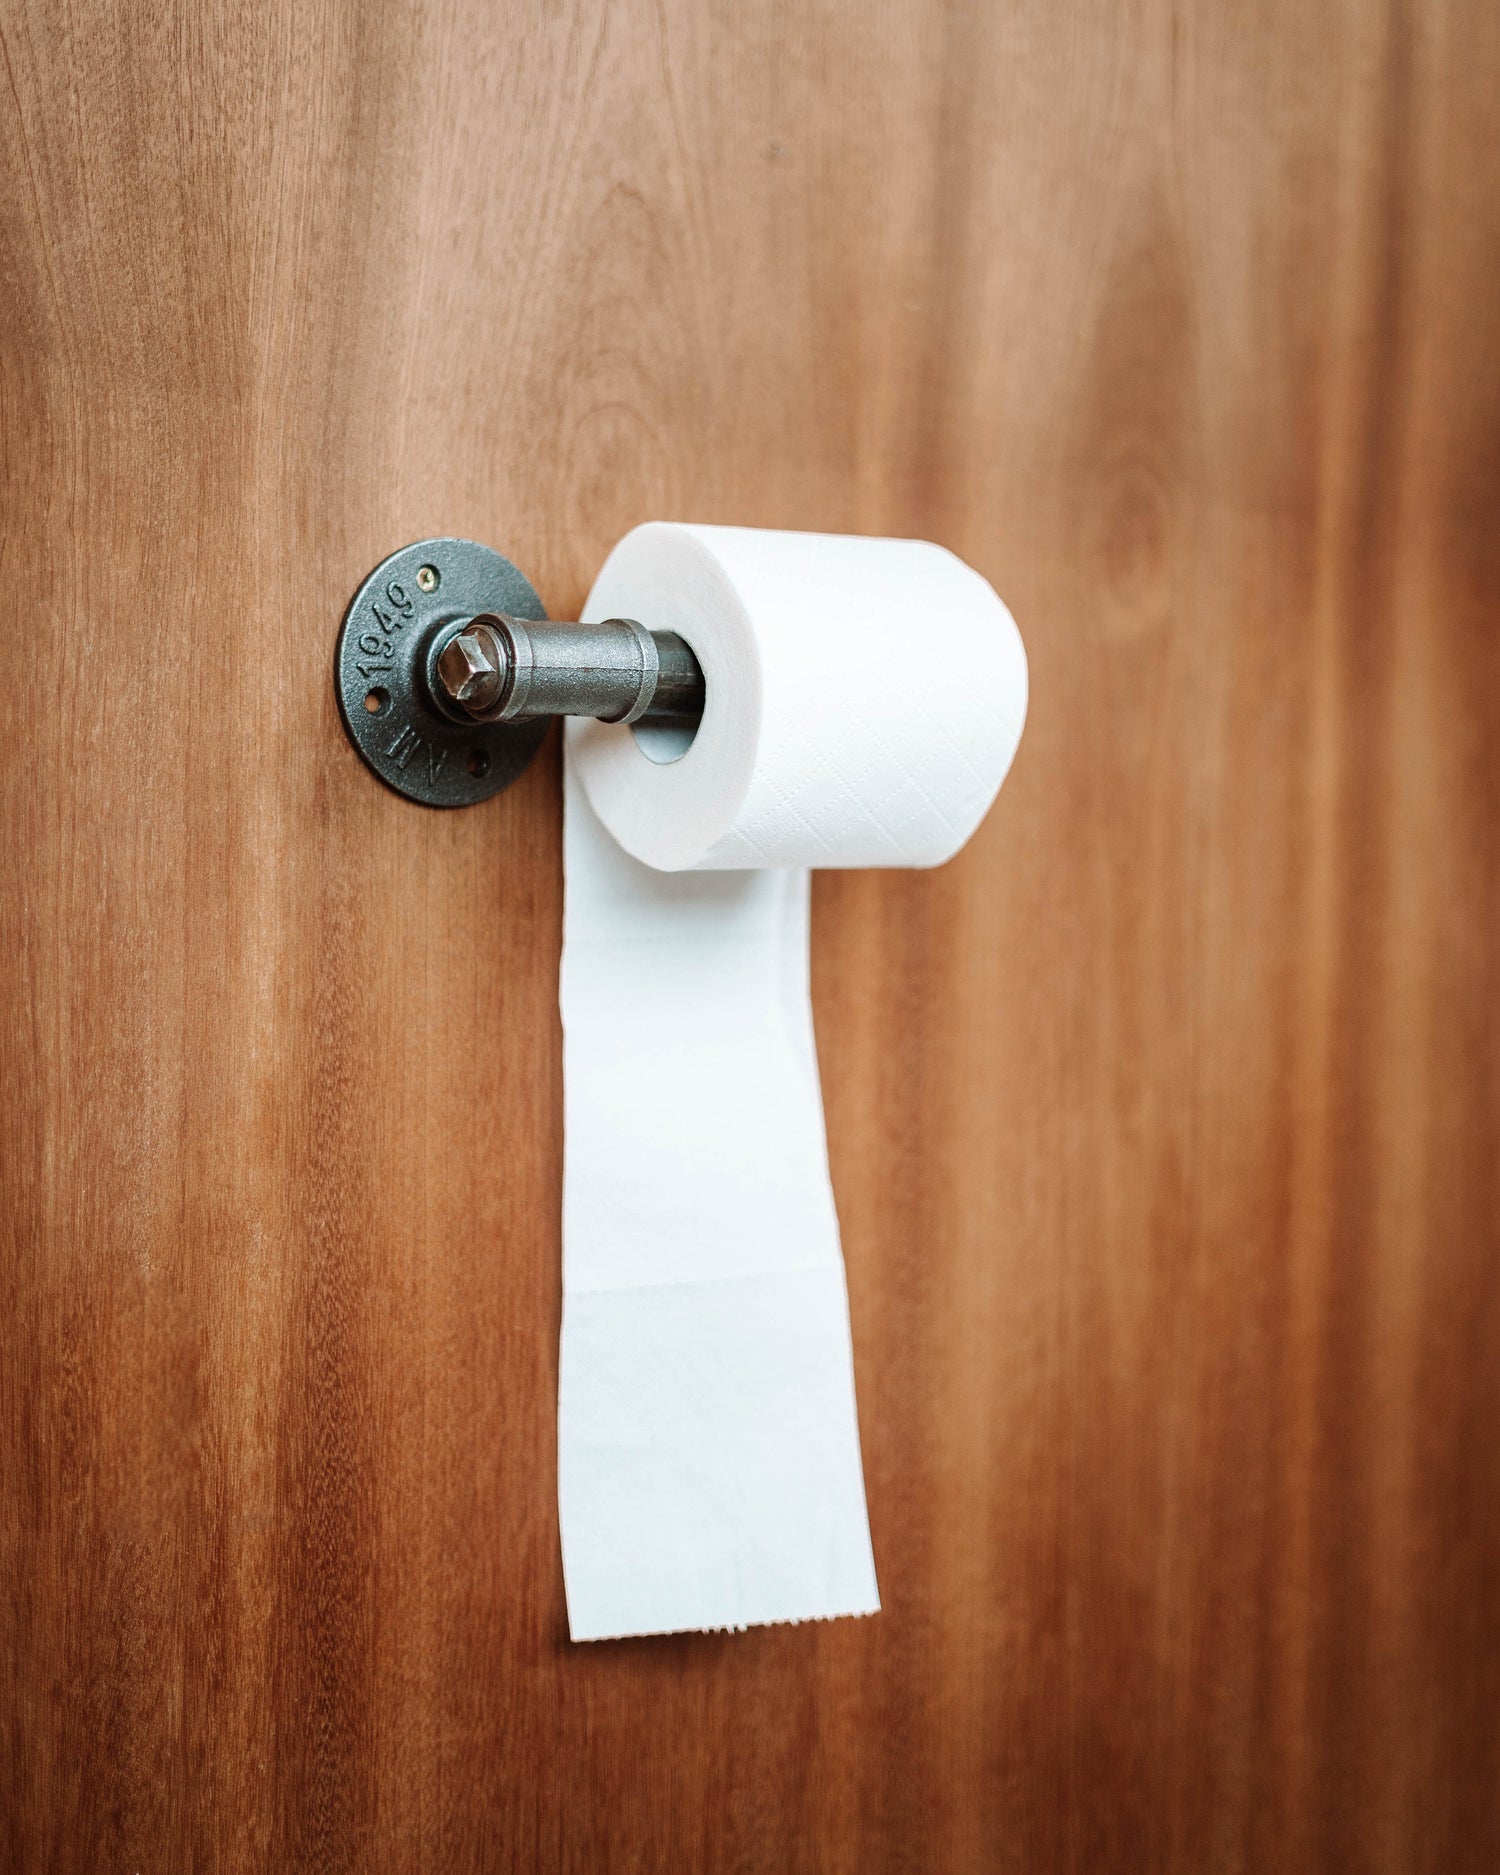 Contemporary Toilet Roll Holder holding toiletroll, highlighting its sleek and wall-mounted design.